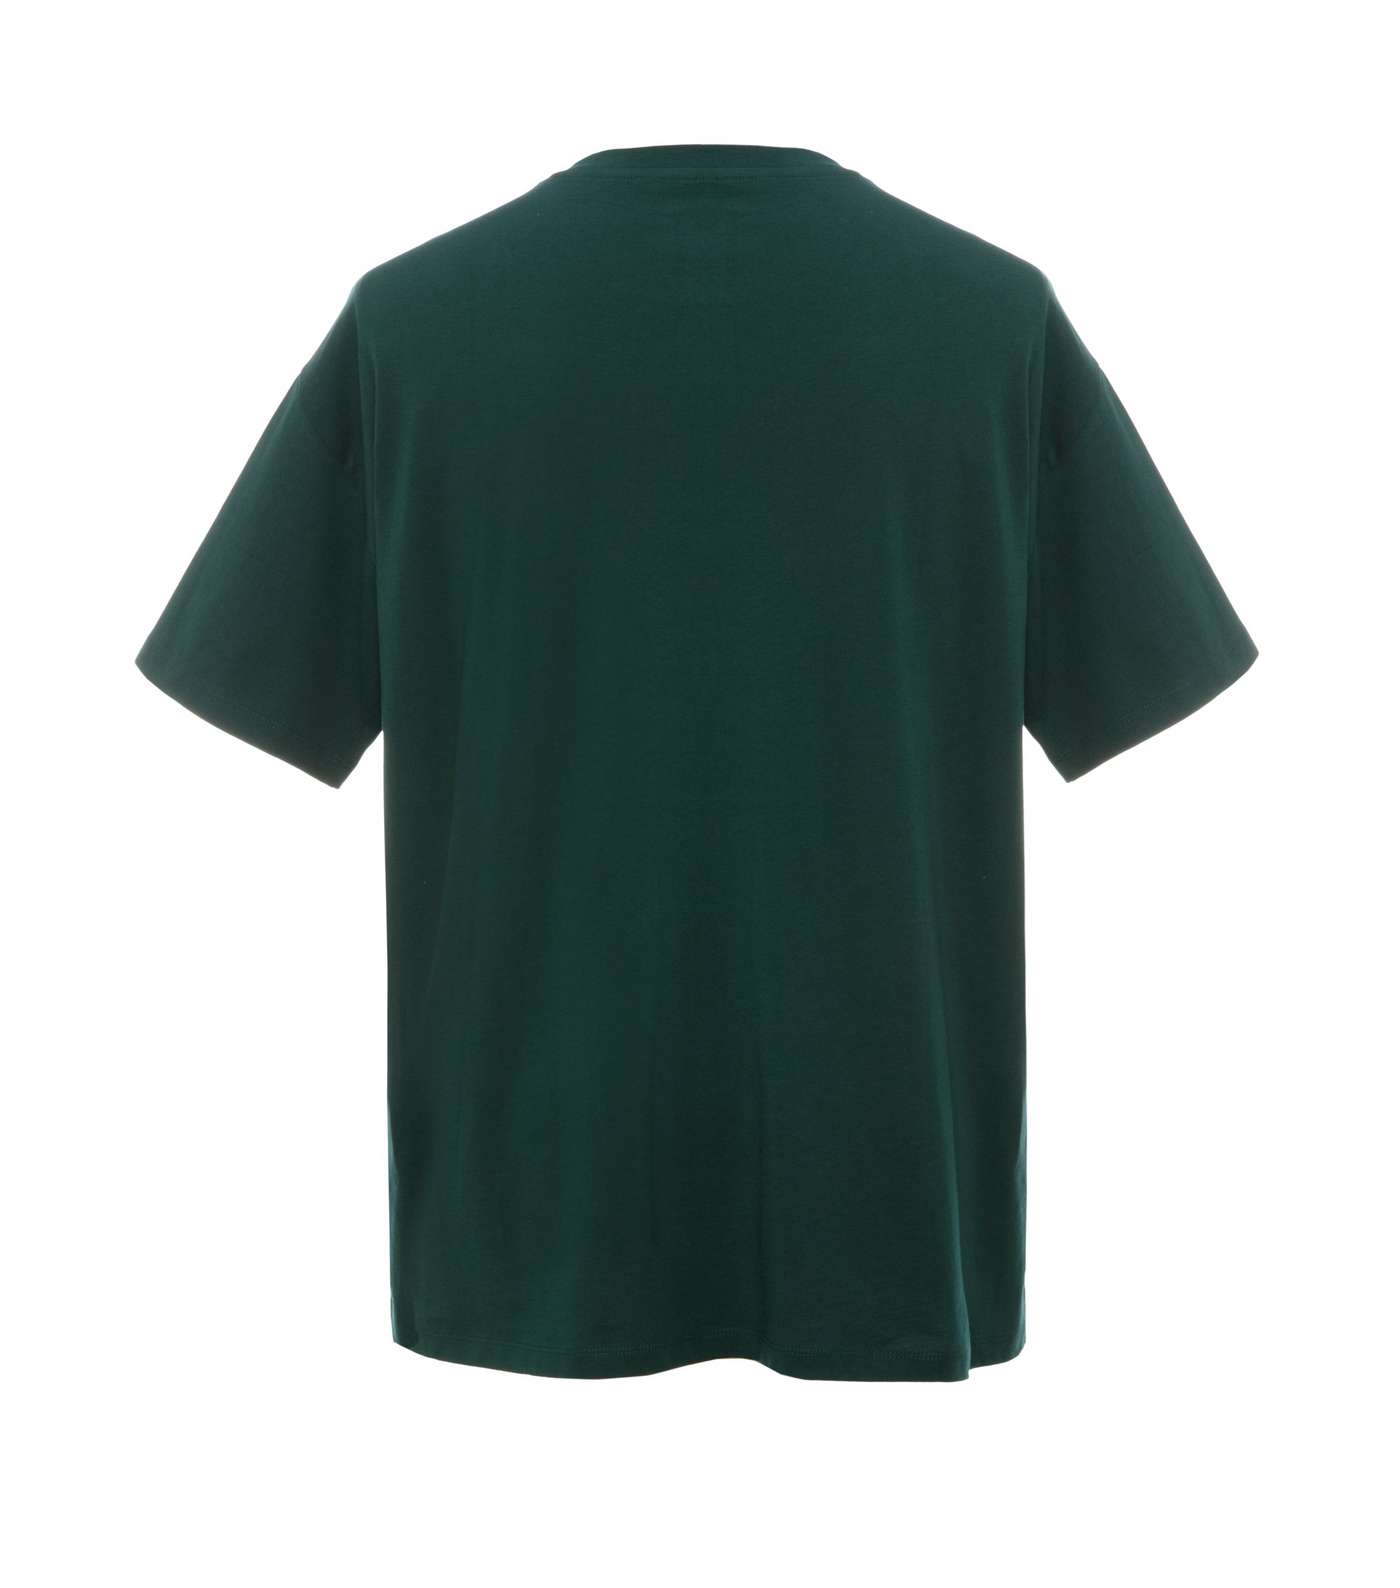 Green Plain Relaxed Fit T-Shirt Image 2